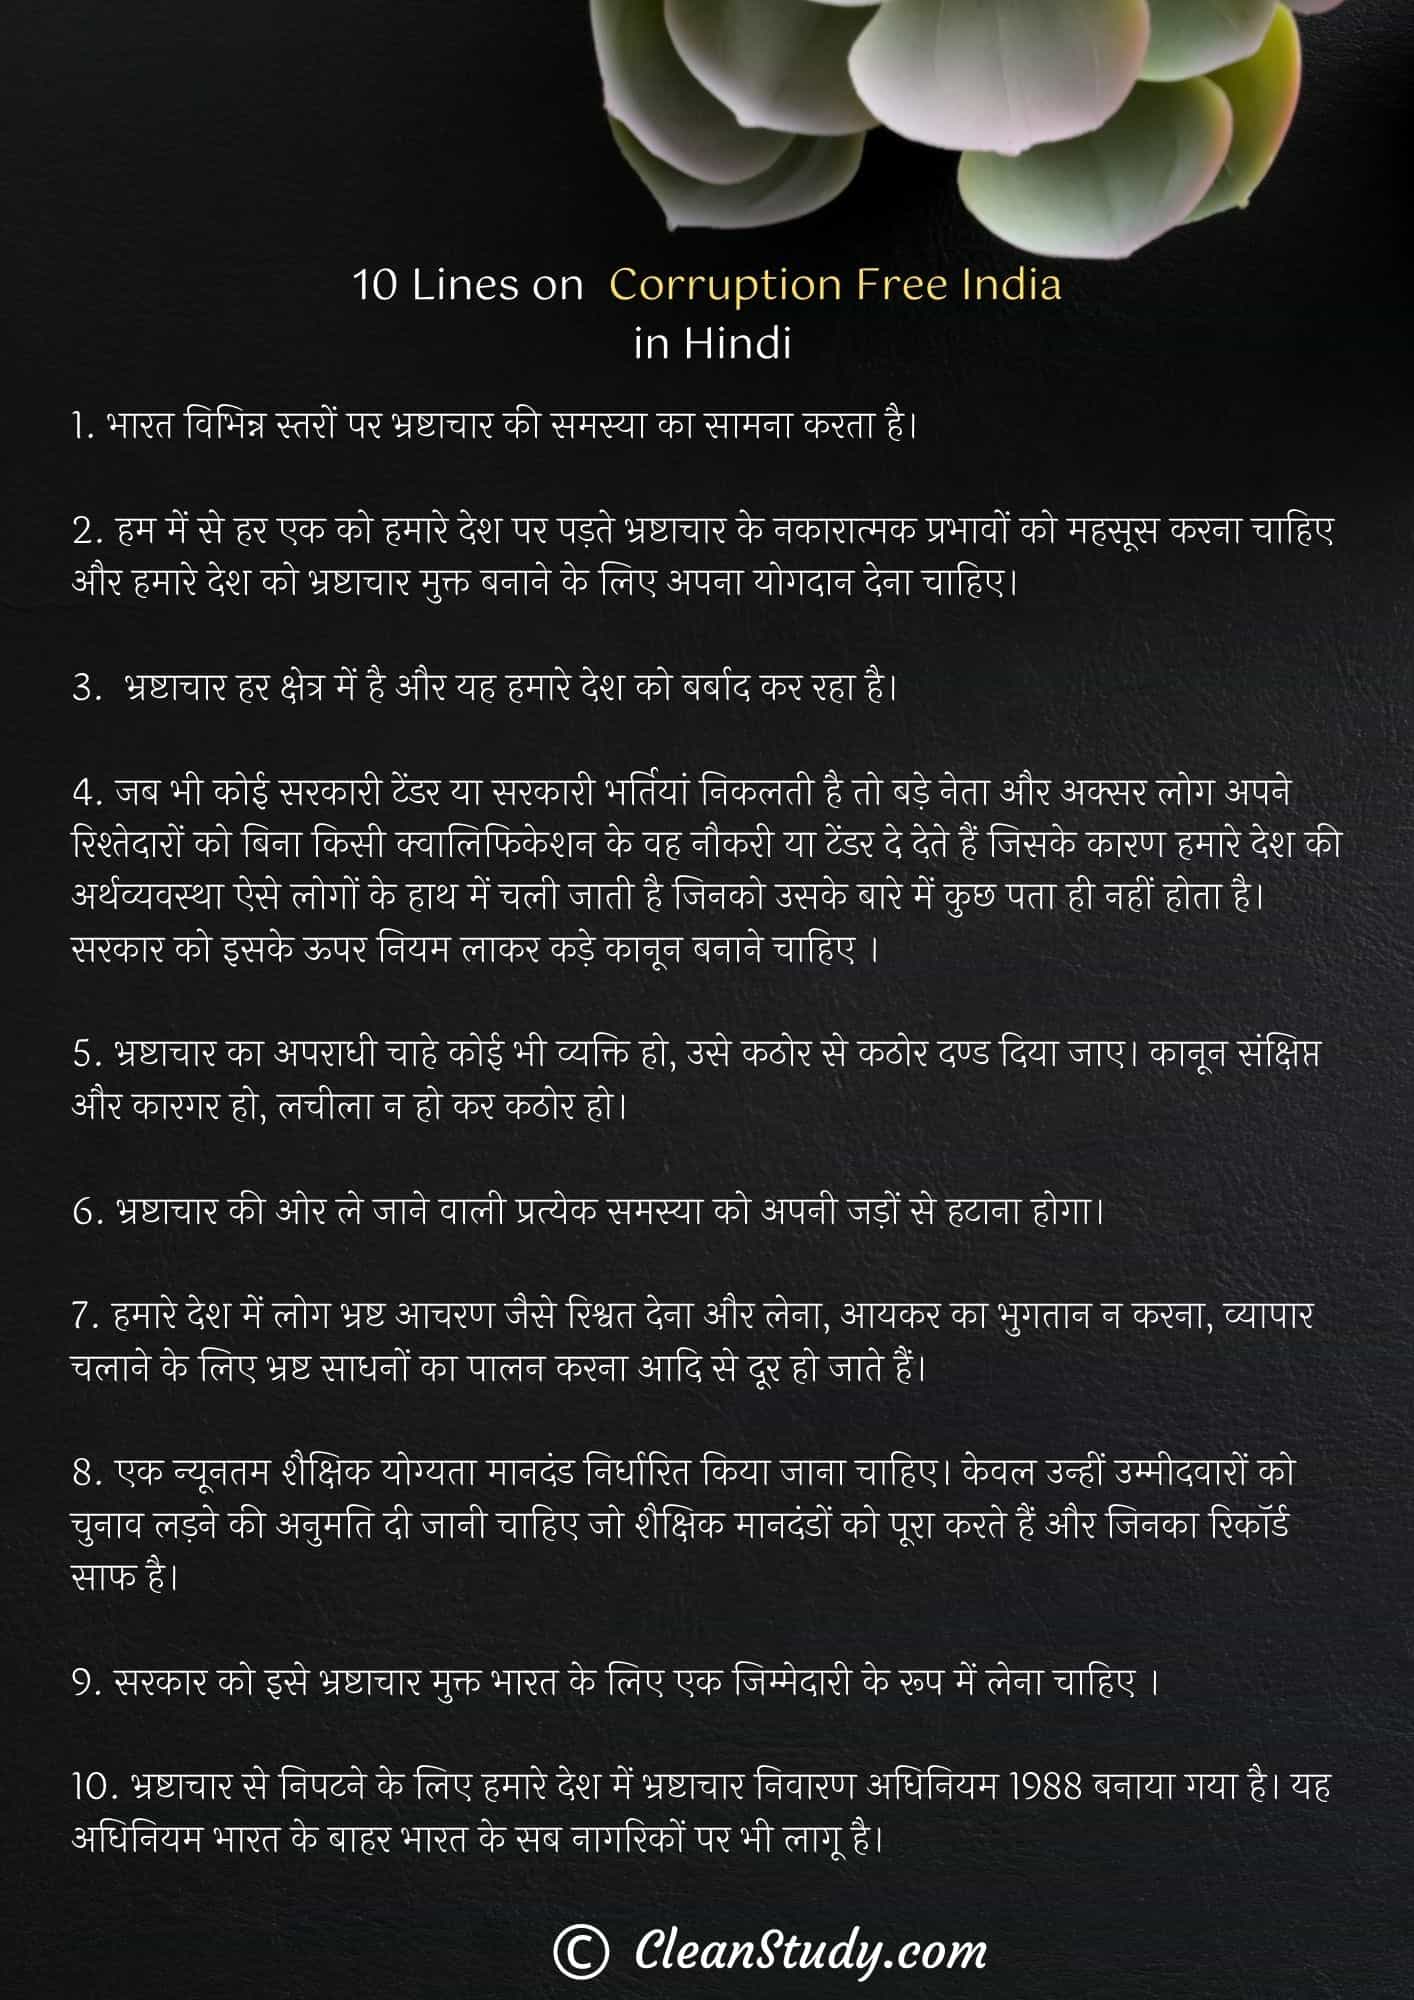 10 Lines on Corruption Free India in Hindi